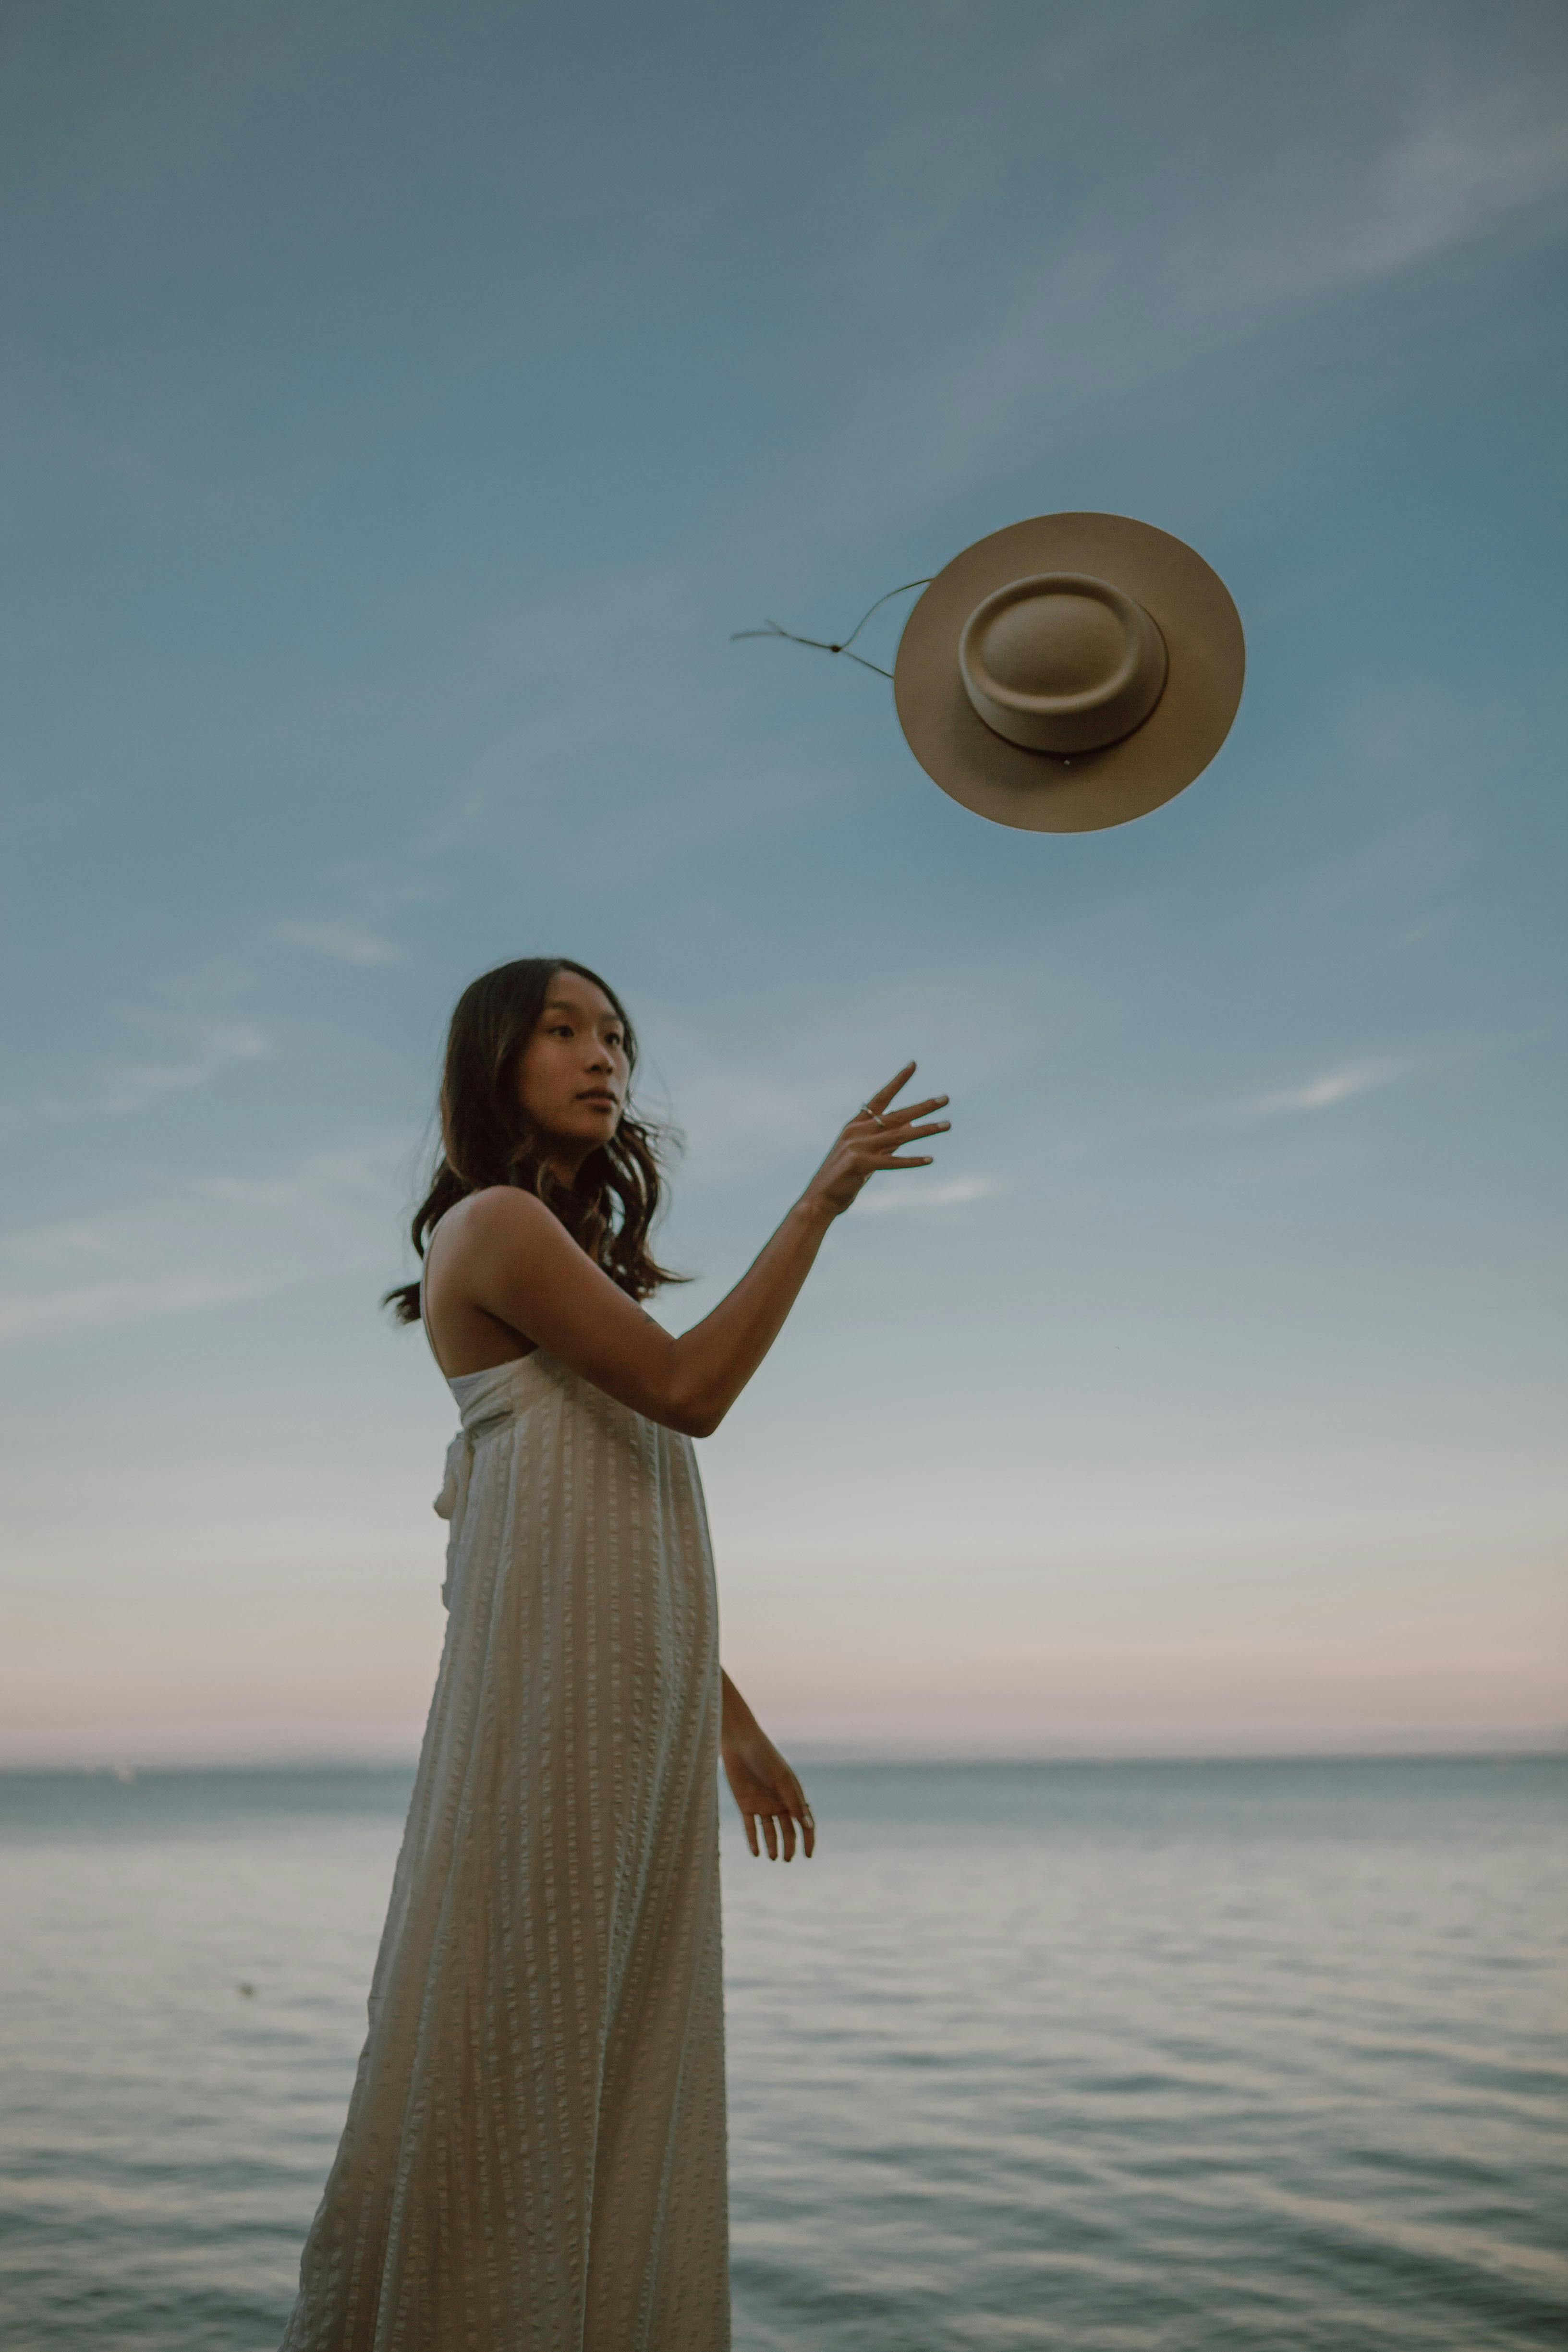 calm ethnic female throwing hat while standing in sea